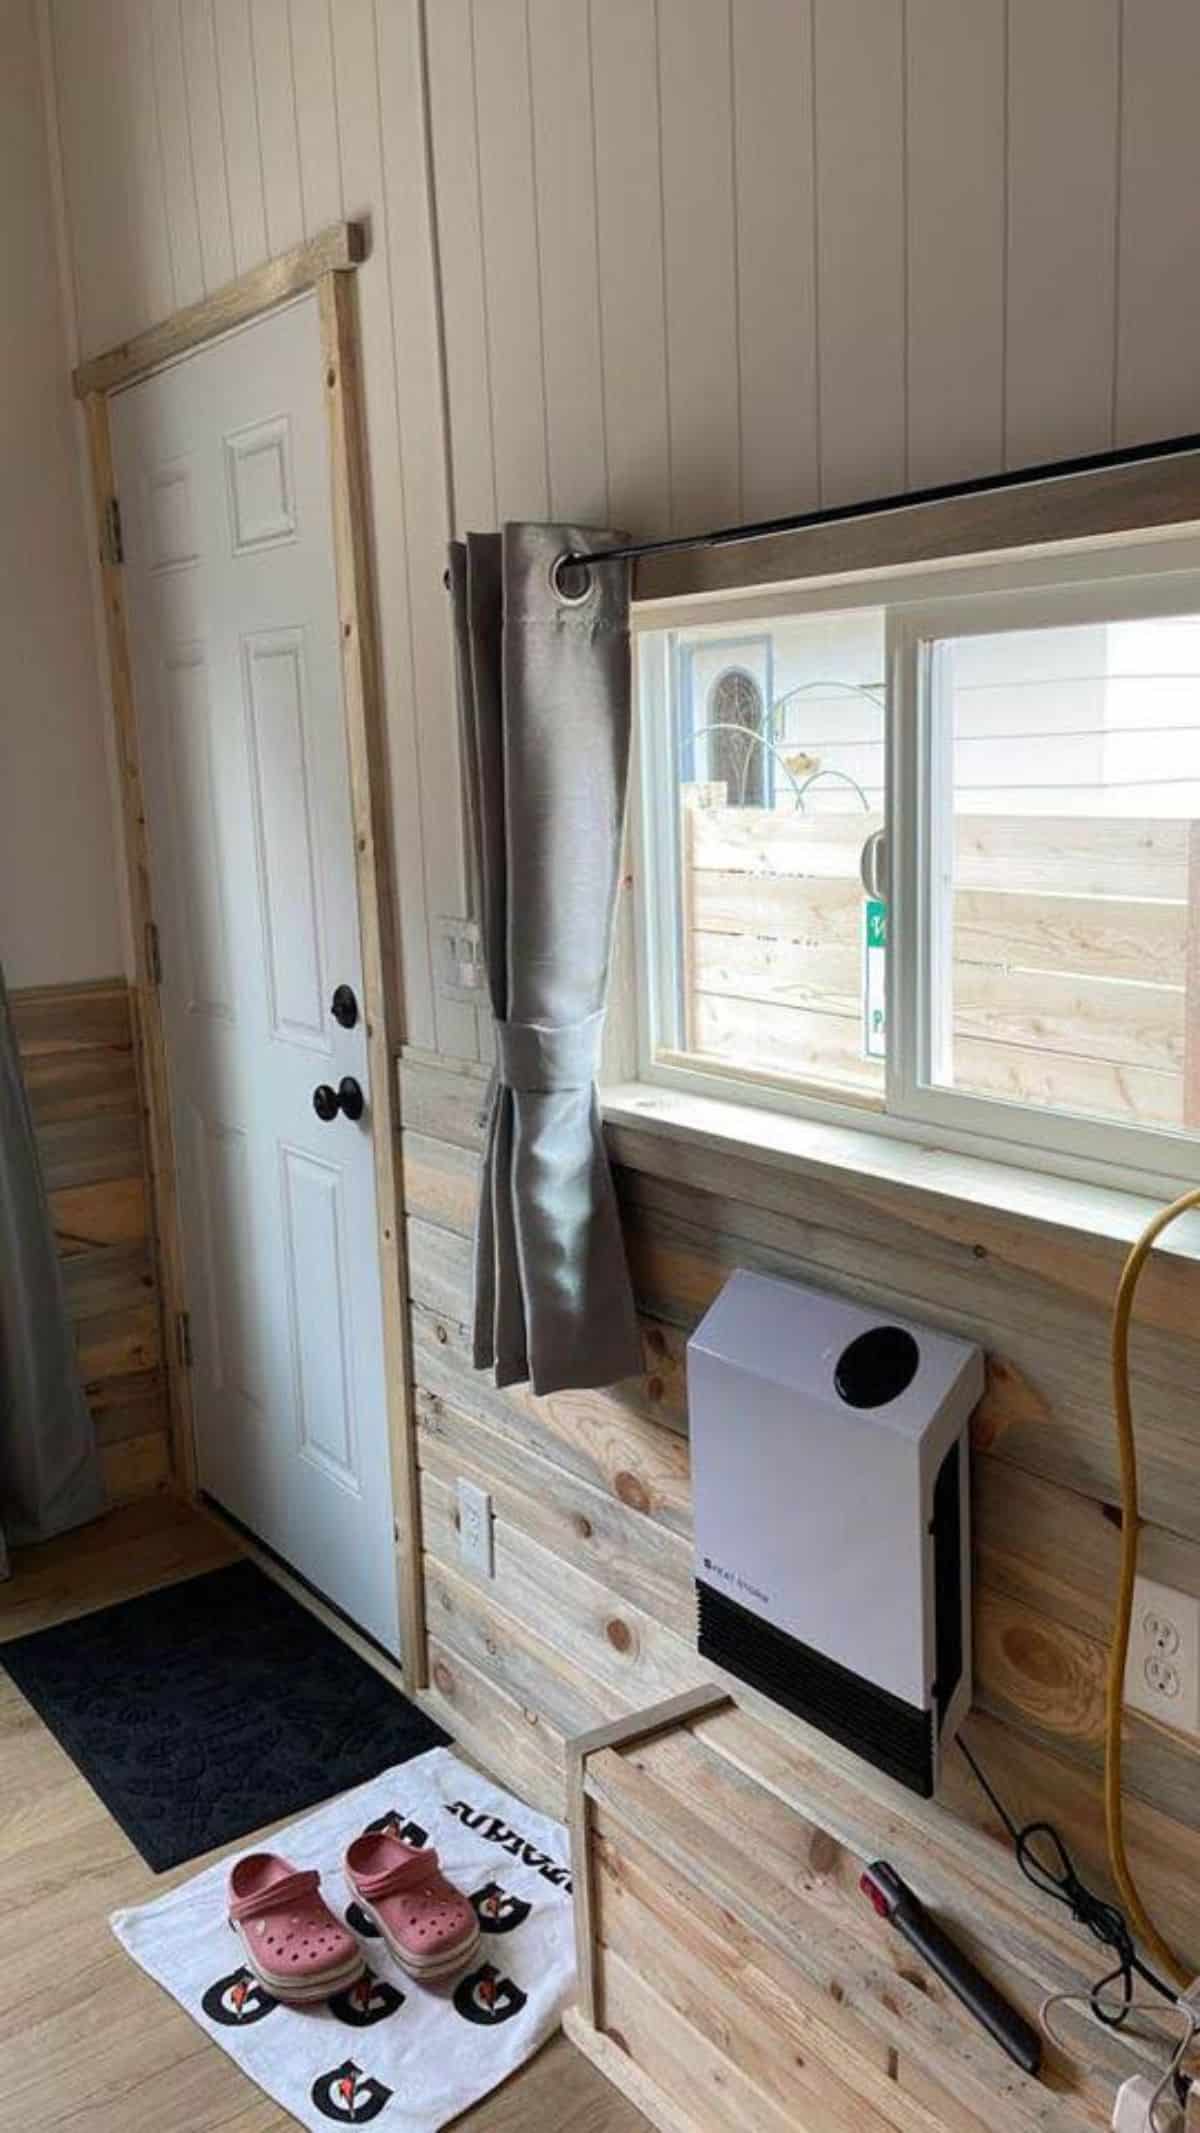 Living area opposite to main door of 20’ Tiny House